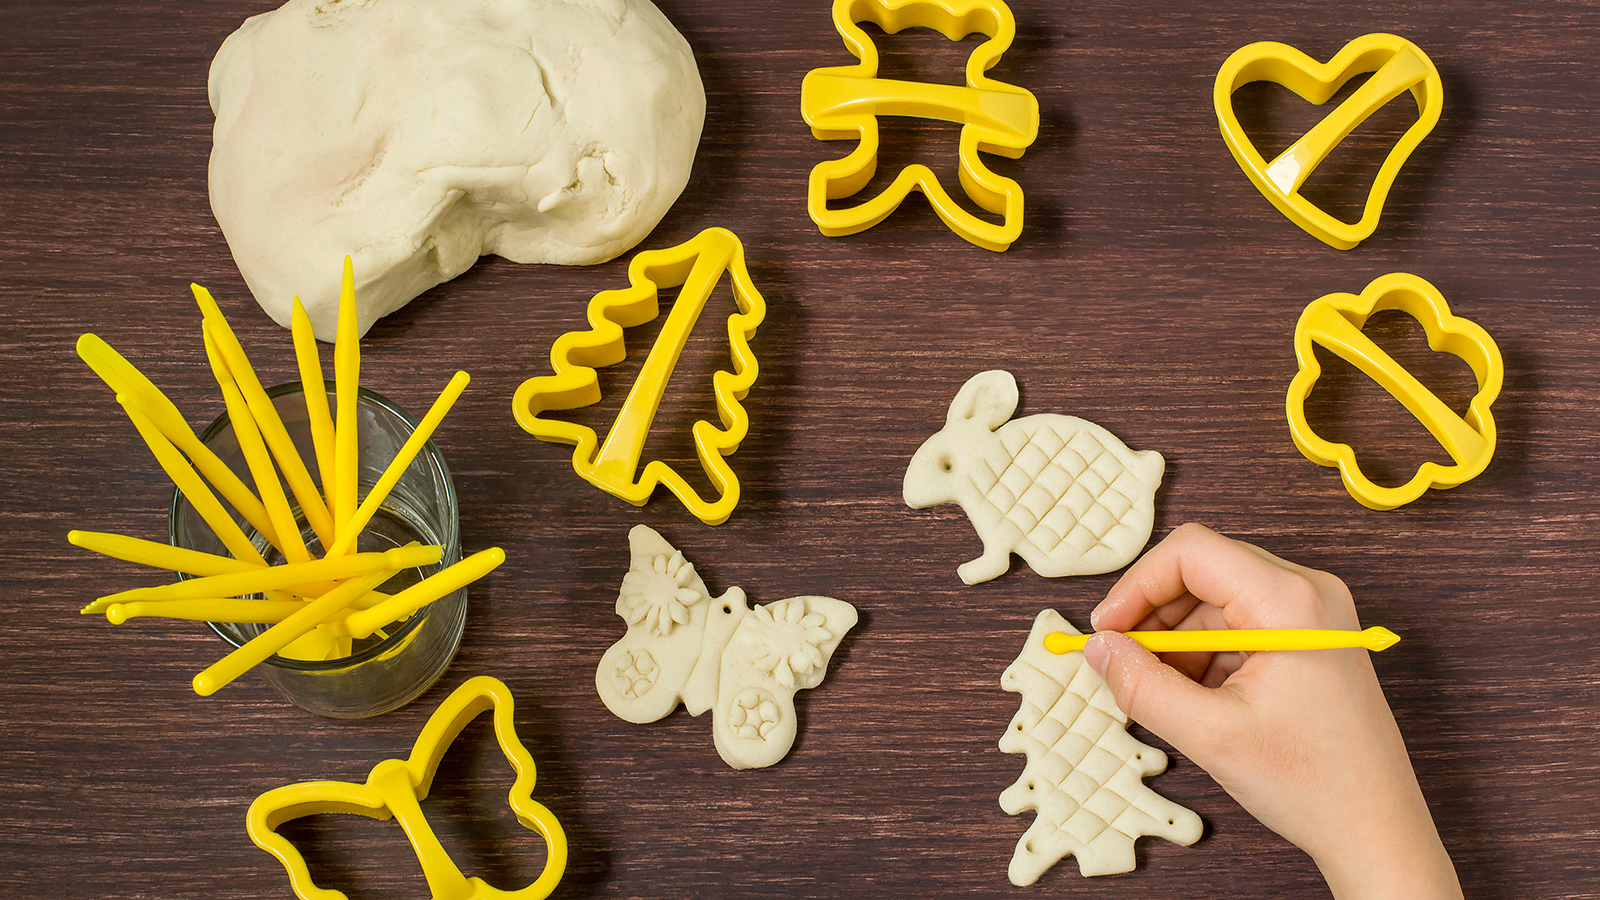 Salt Dough Ornaments - Keep your salt-dough ornaments and homemade play dough away from your pets, and make sure they always have fresh water.